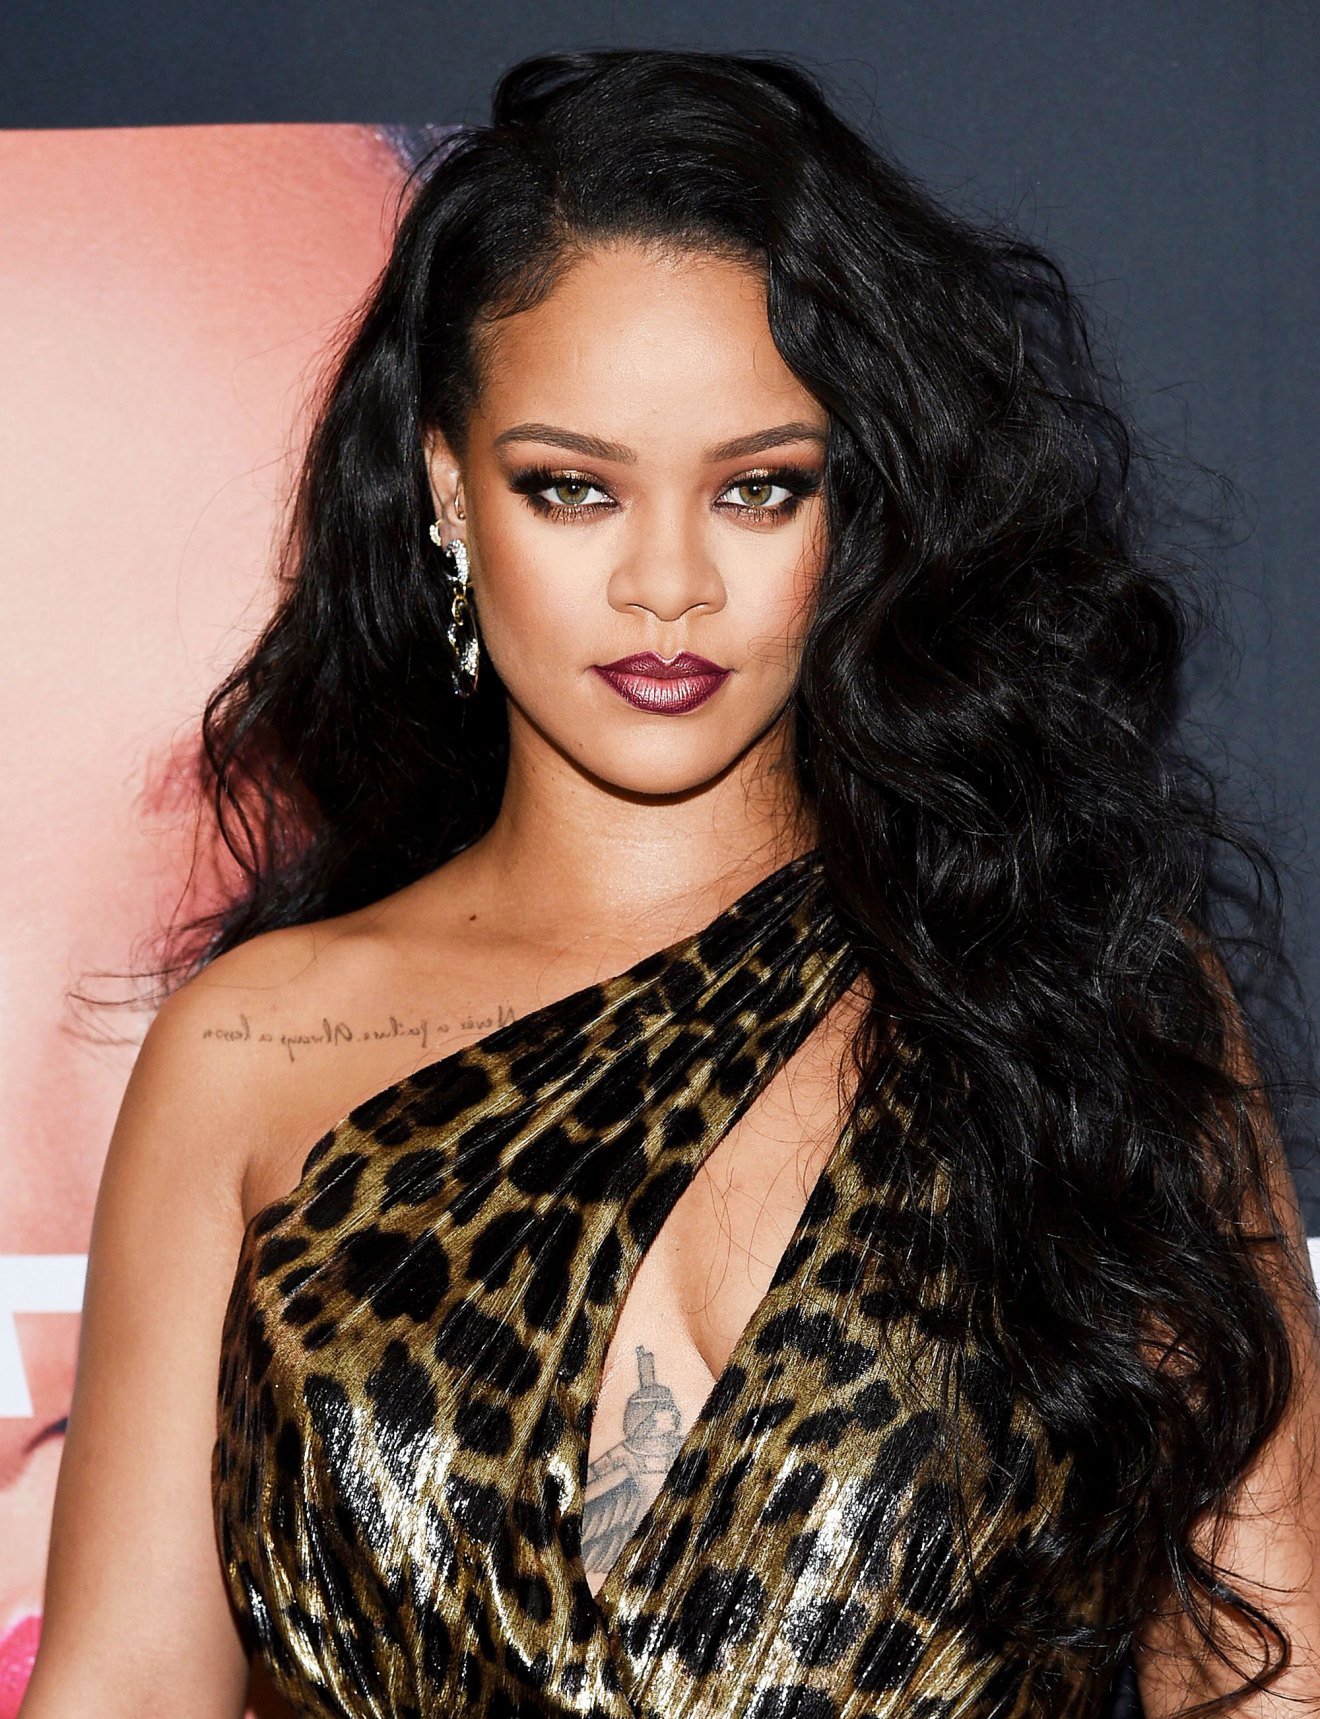 Rihanna Reveals Product Details And Launch Date For Fenty Beauty